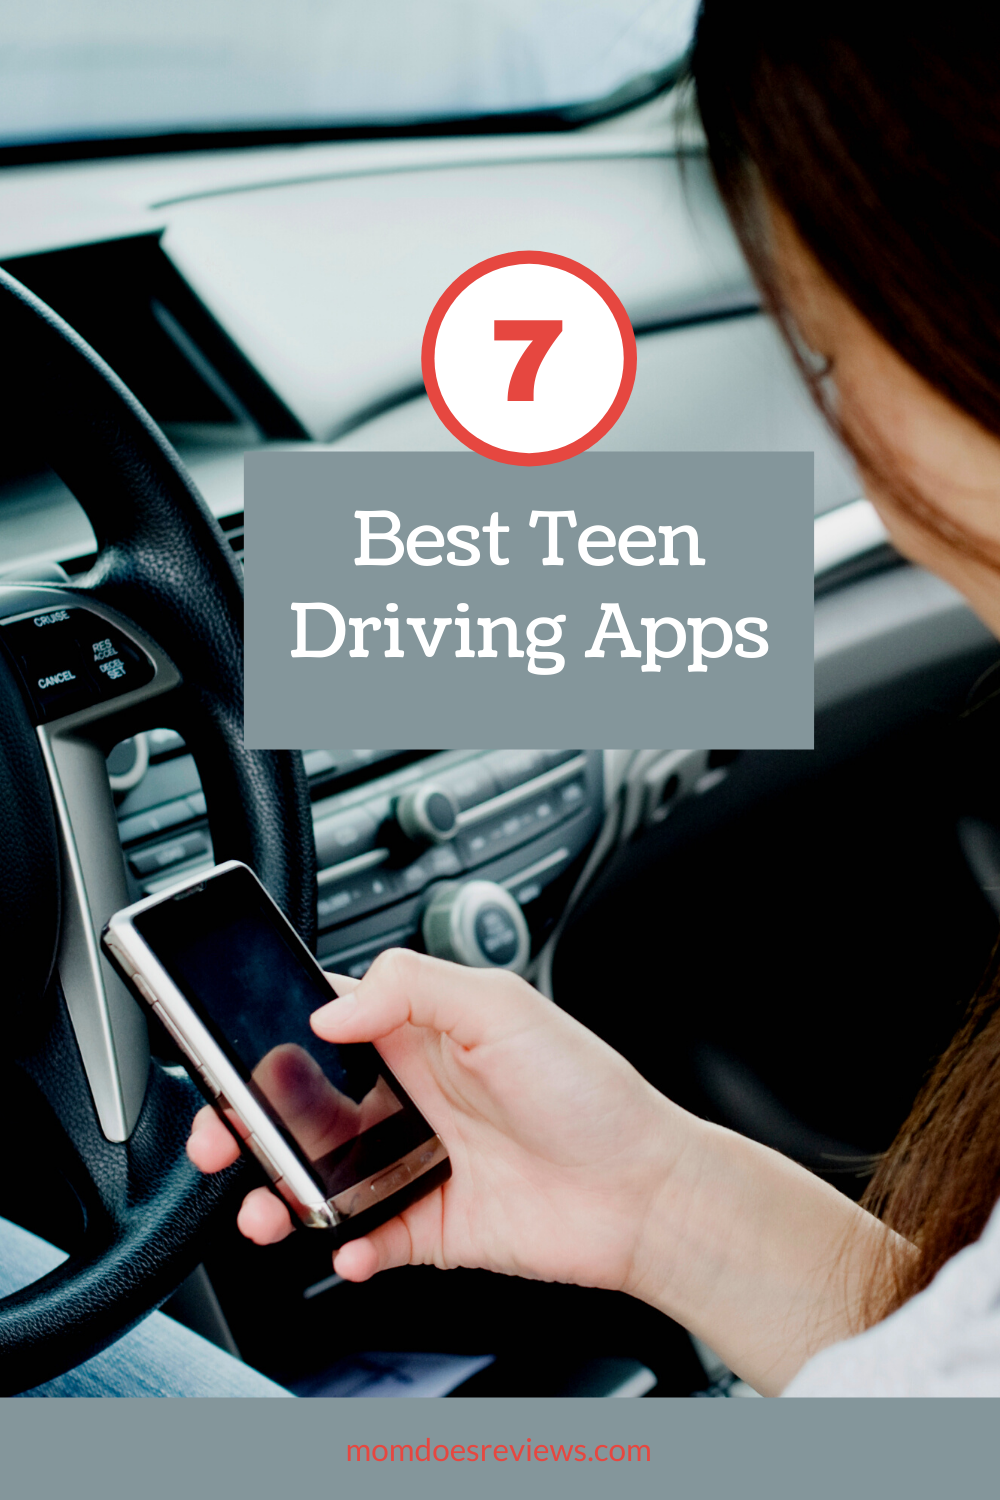 The 7 Best Teenage Driving Monitoring Apps